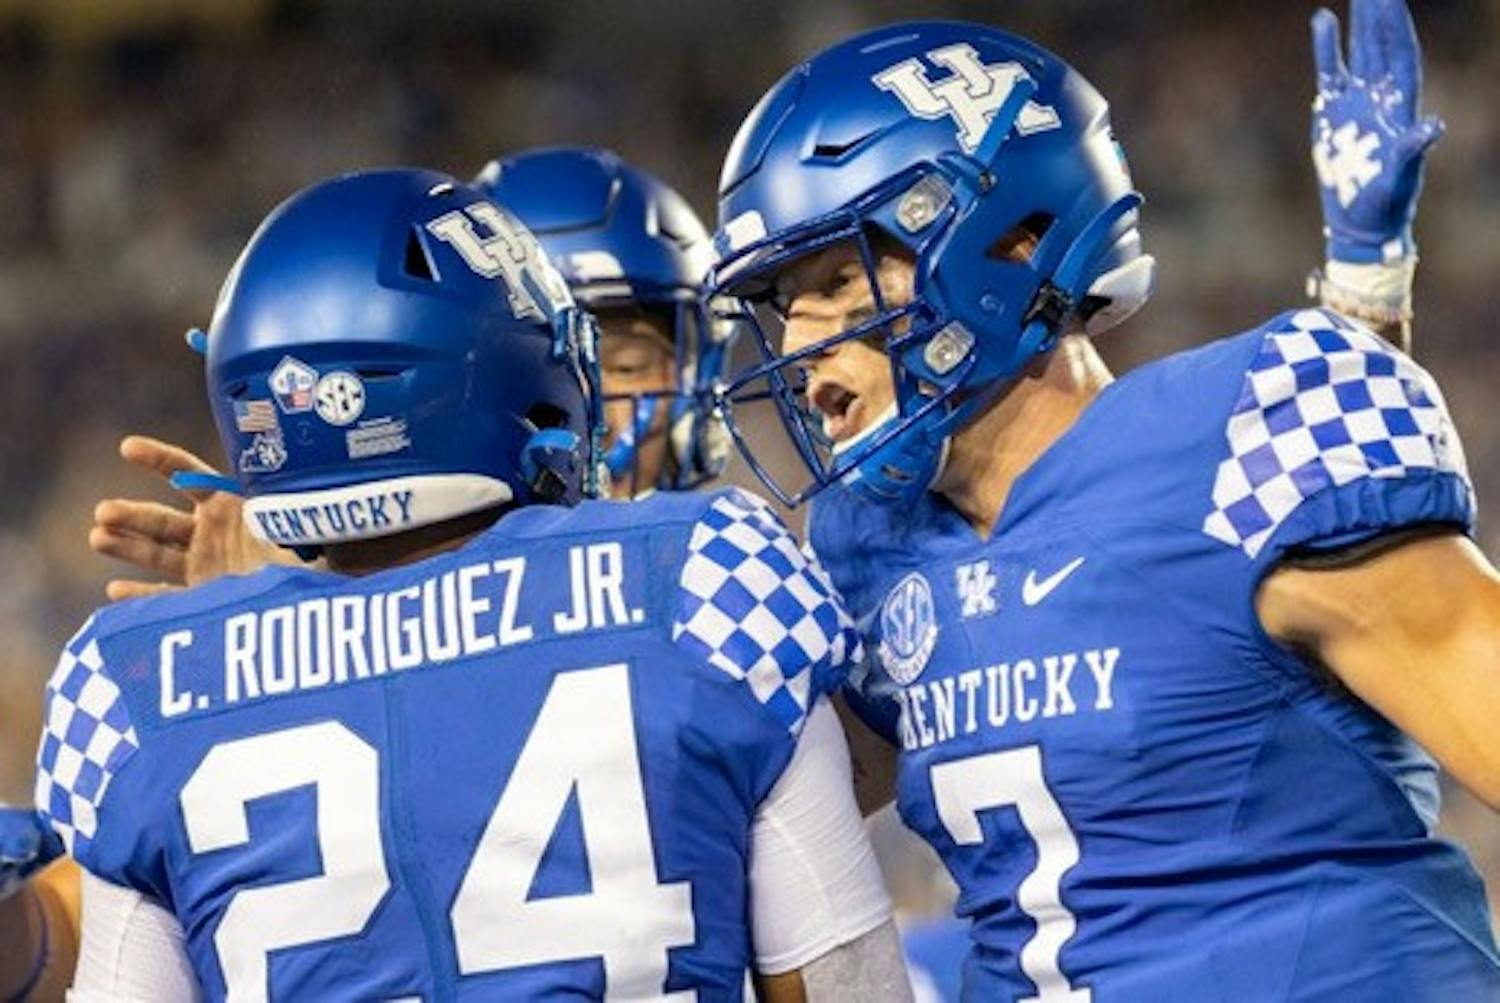 Kentucky quarterback Will Levis (7) and Chris Rodriguez Jr. (24) celebrate together during a game. Photo by Jack Weaver (Kentucky Kernel).